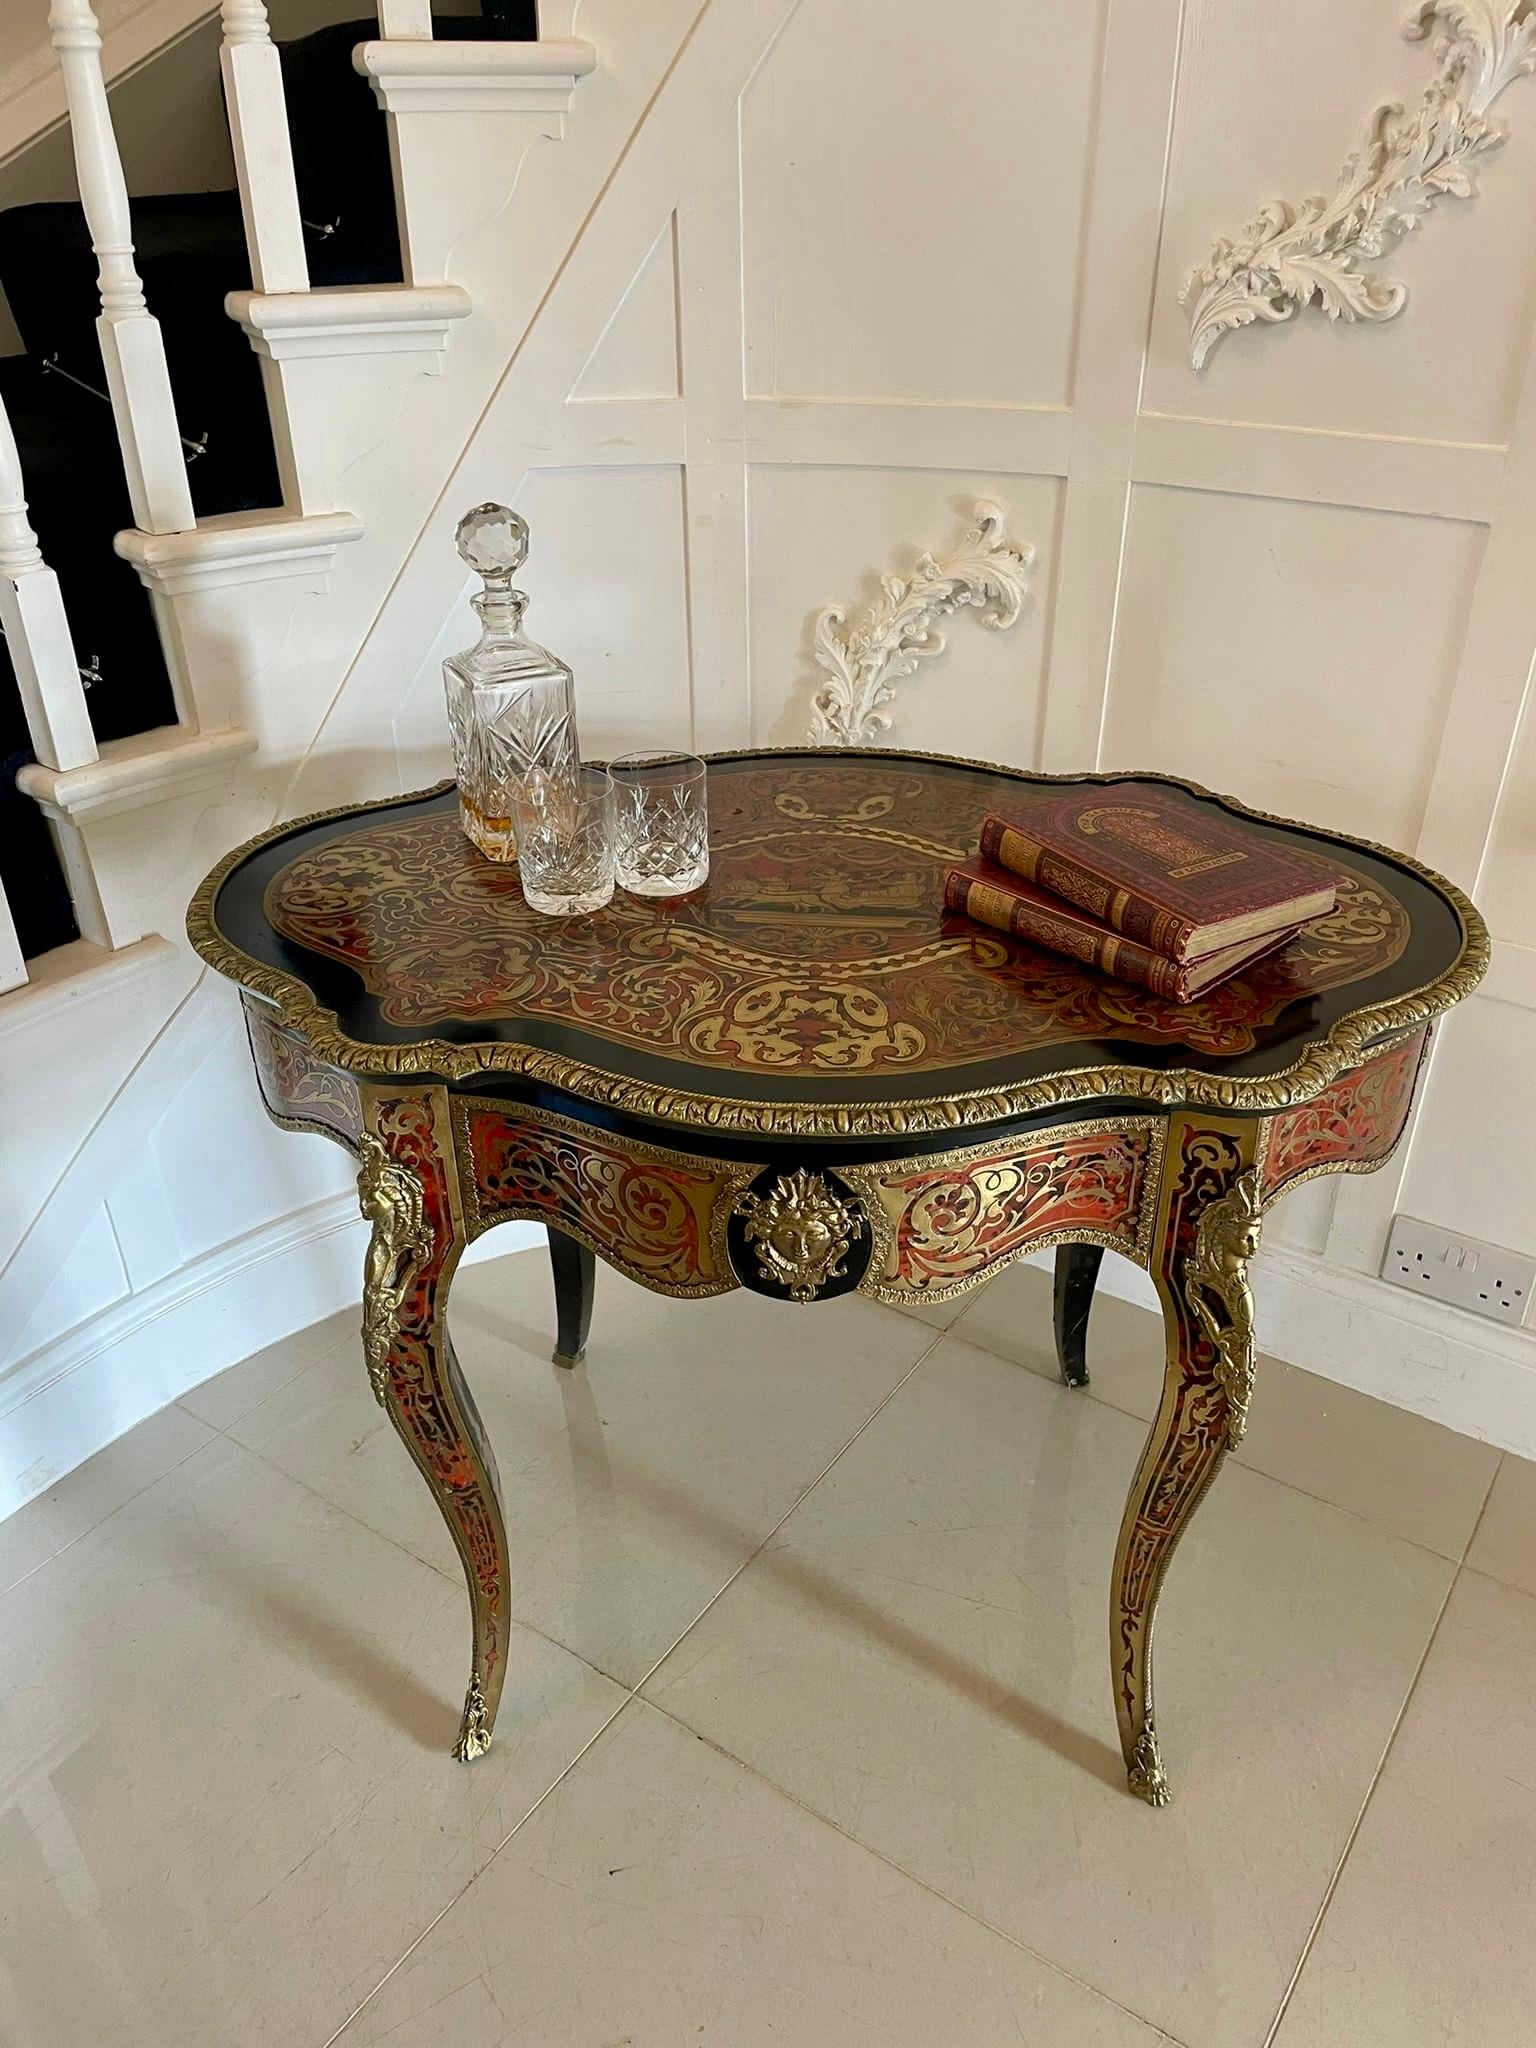 Antique French Boulle Centre Table having a fabulous serpentine shaped top featuring all over tortoise shell and profuse inlaid brass decoration, quality gilt bronze mounts and a single drawer standing on elegantly  shaped legs with brass inlay and